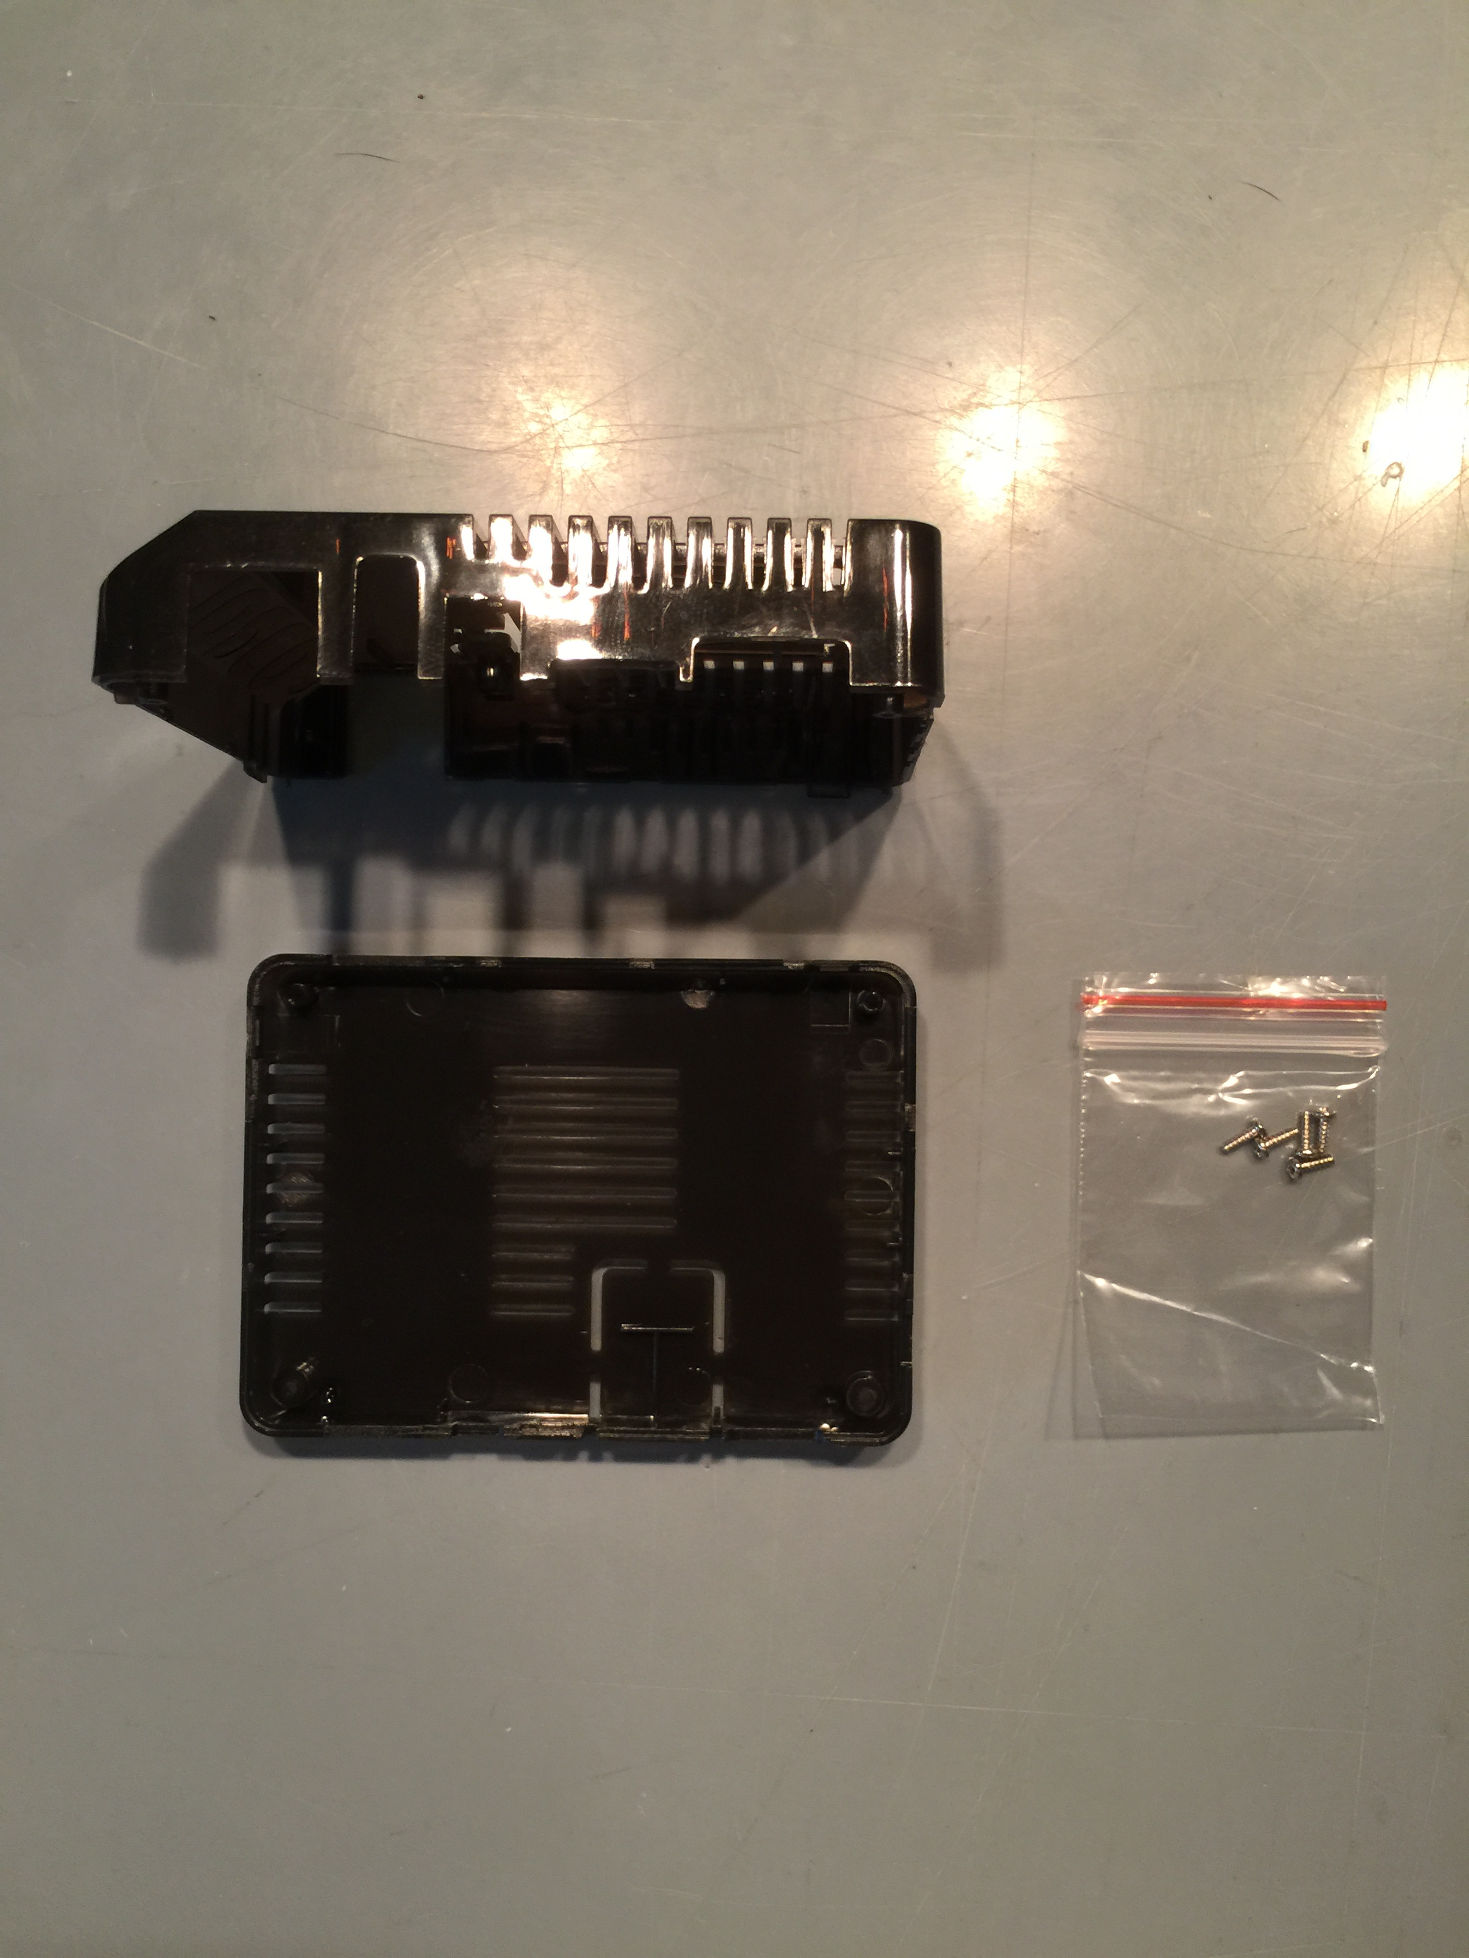 Figure 3 - ODROID-C2 case side and top view